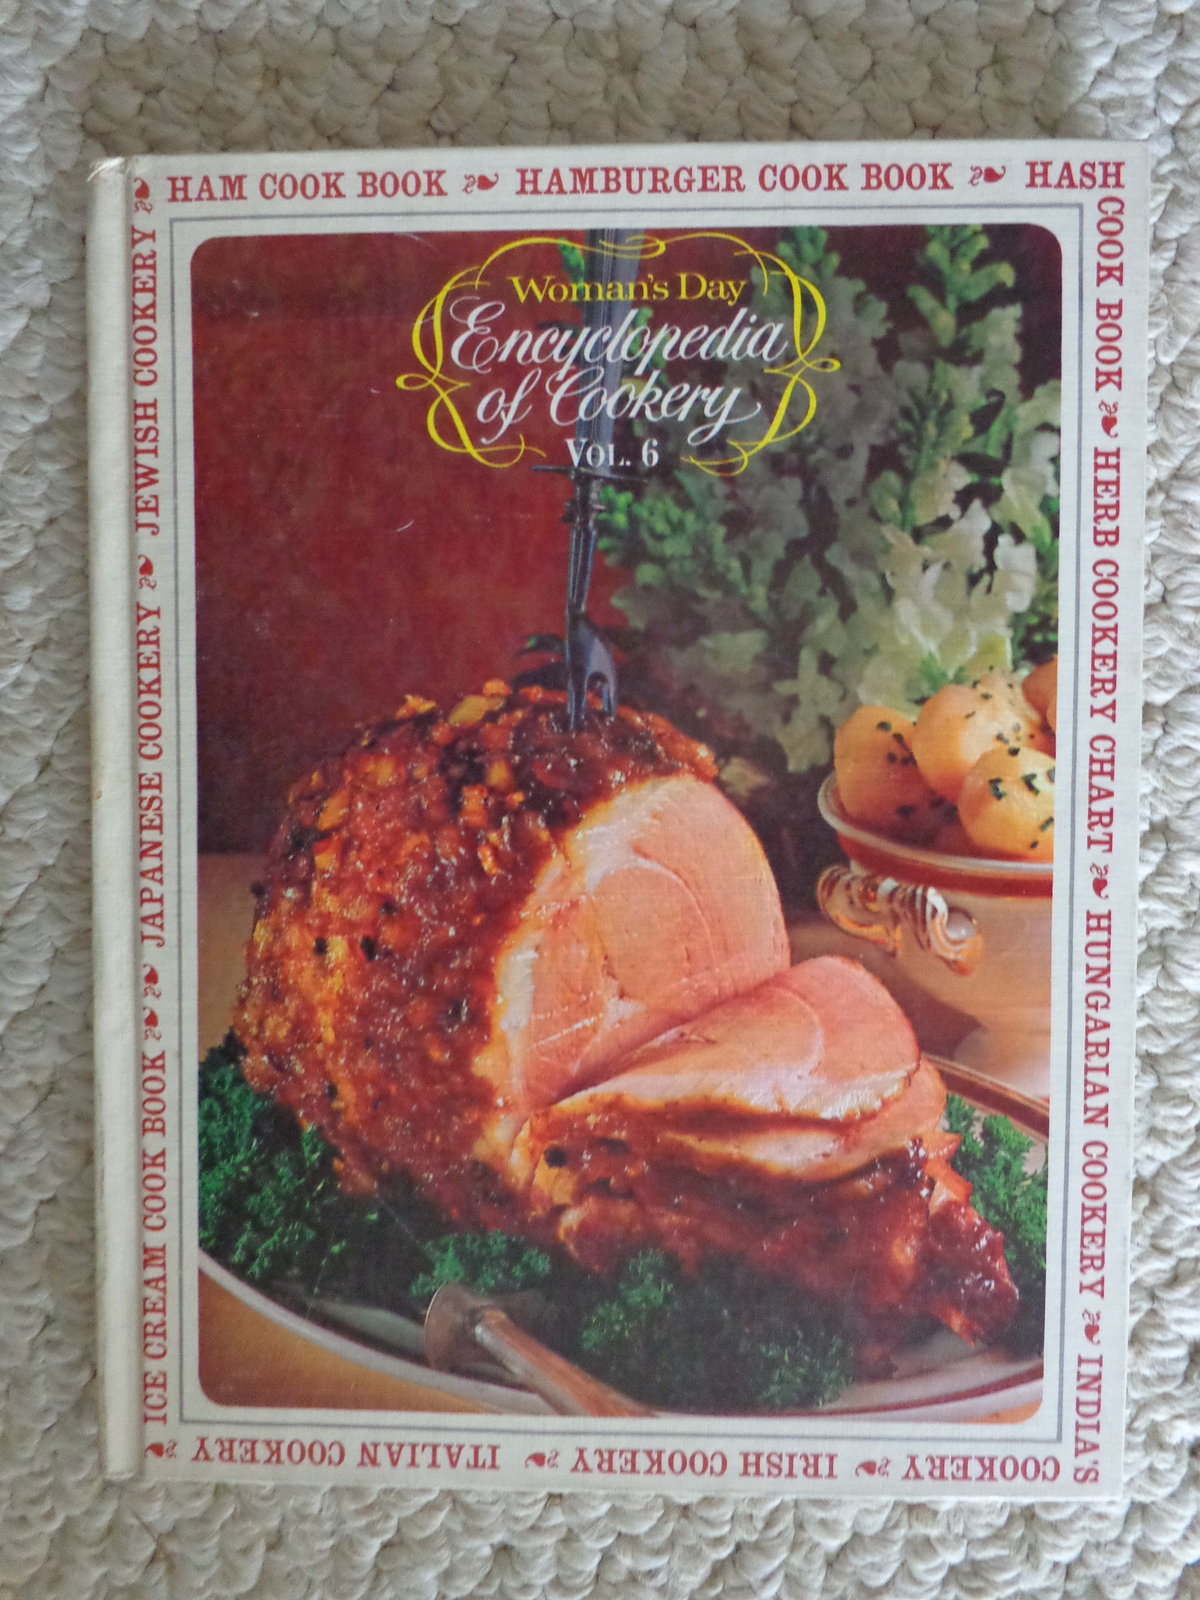 Women’s Day Encyclopedia of Cookery Vol. 6, 1966 (#3650) - $14.99